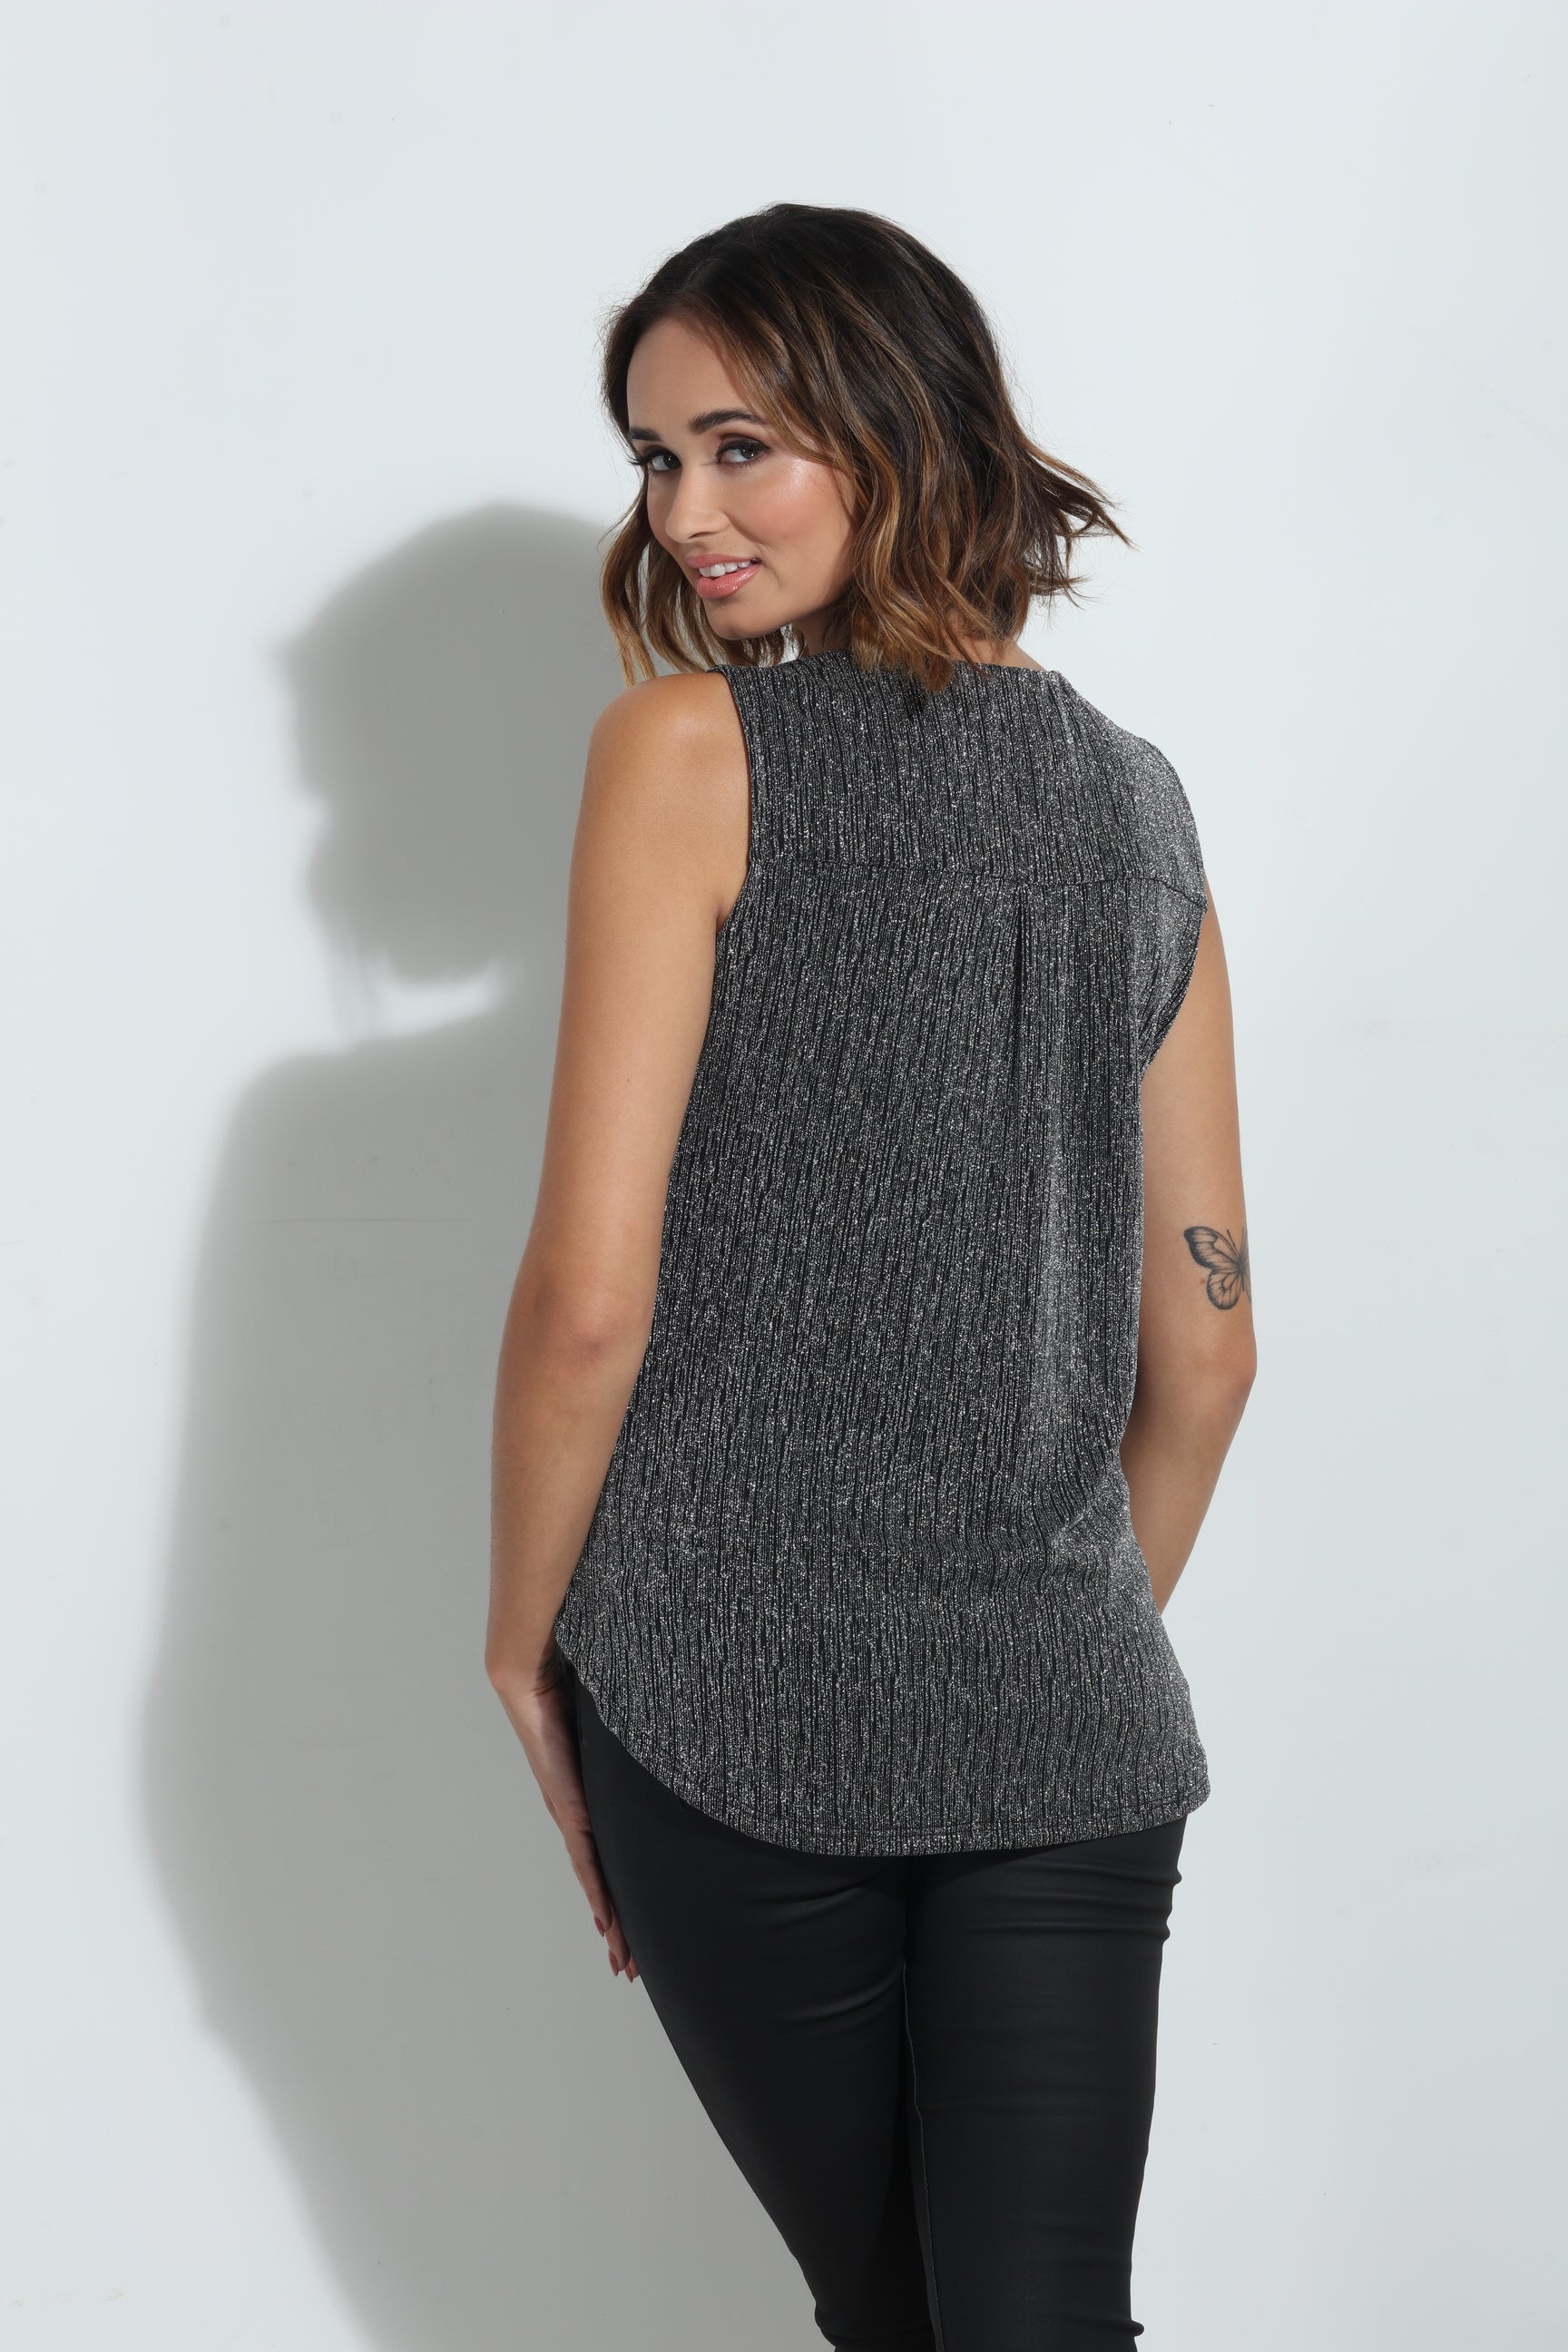 The Everyday Surplice Tank-Black & Silver Sparkle -BEST SELLER by